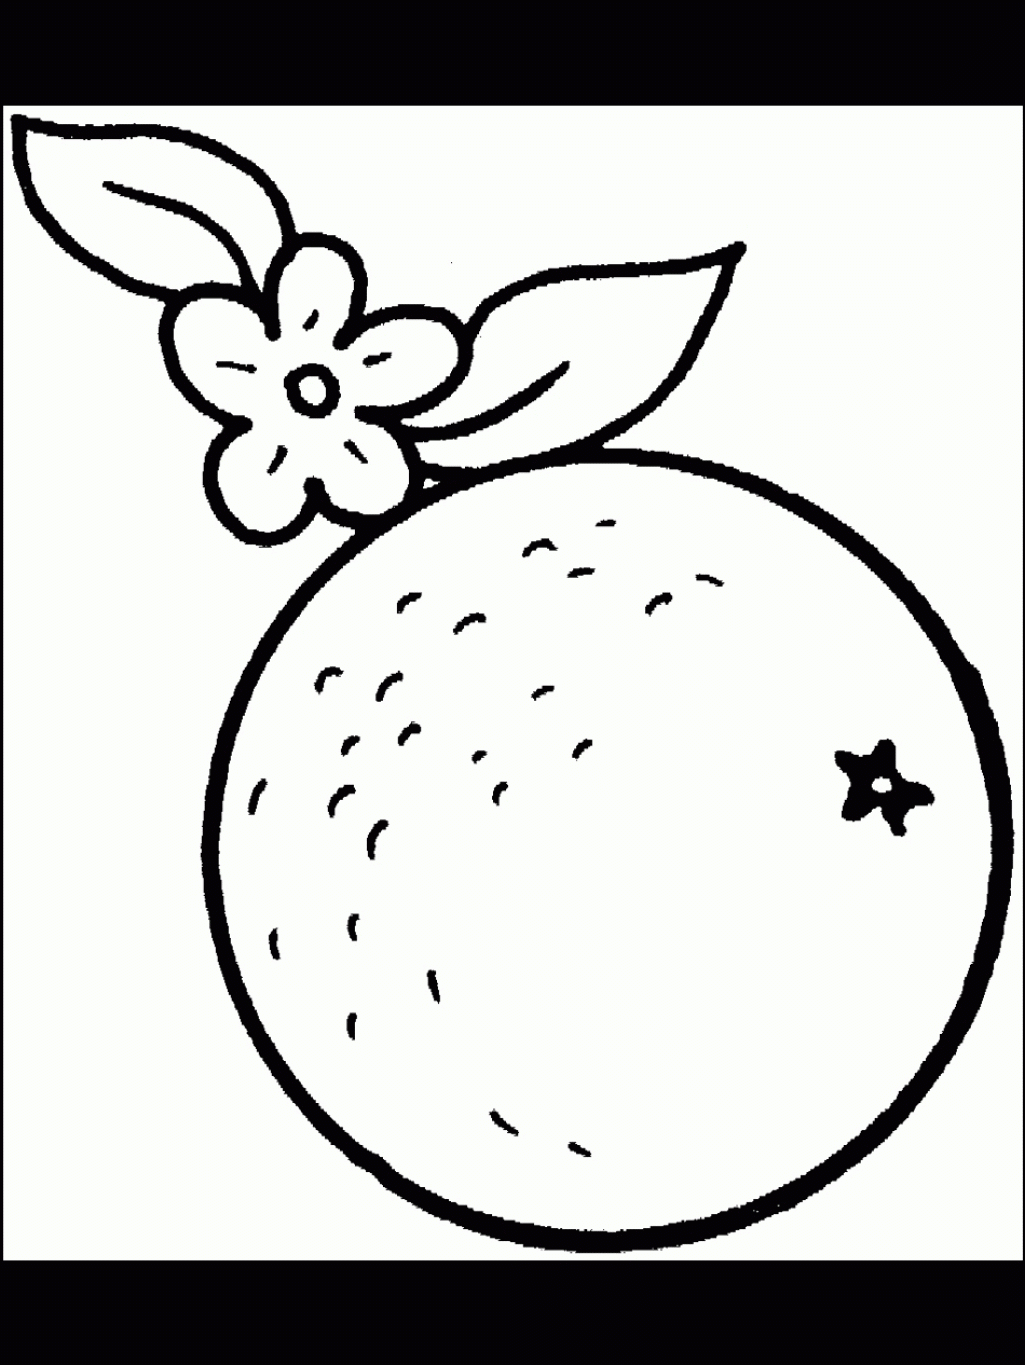 coloring-page-of-fruits-and-vegetables-free-coloring-page-coloring-home